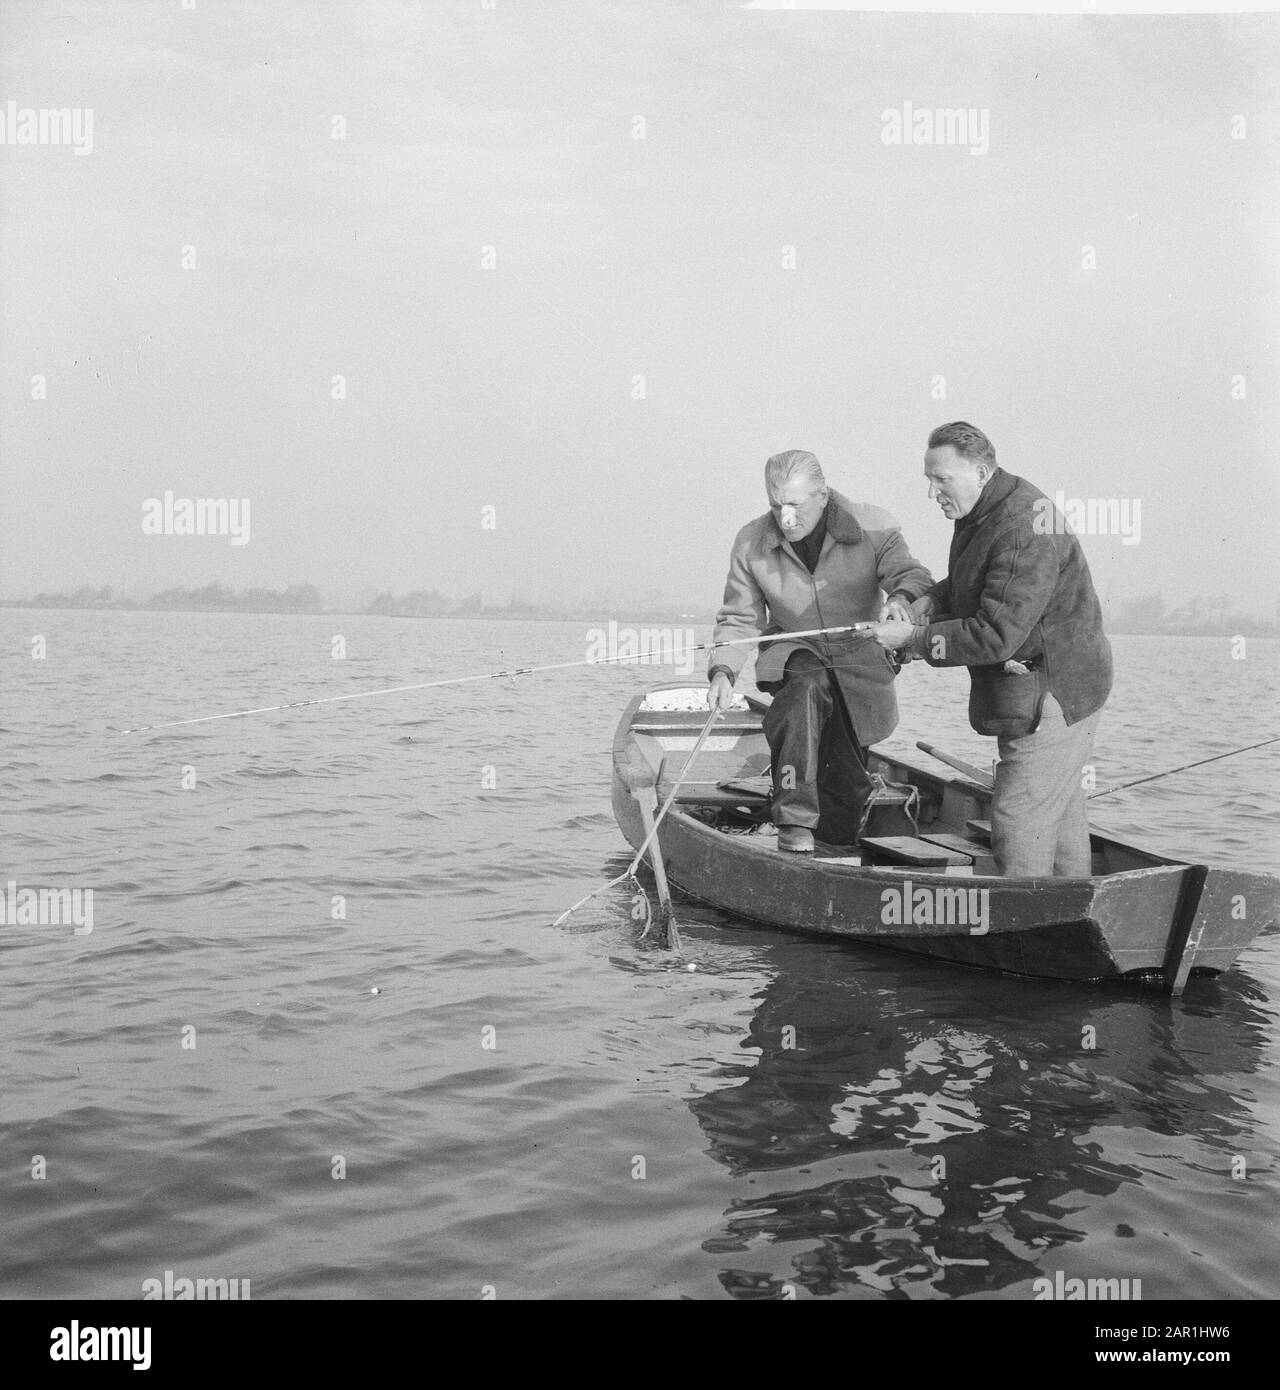 Boat two fishermen Black and White Stock Photos & Images - Page 2 - Alamy